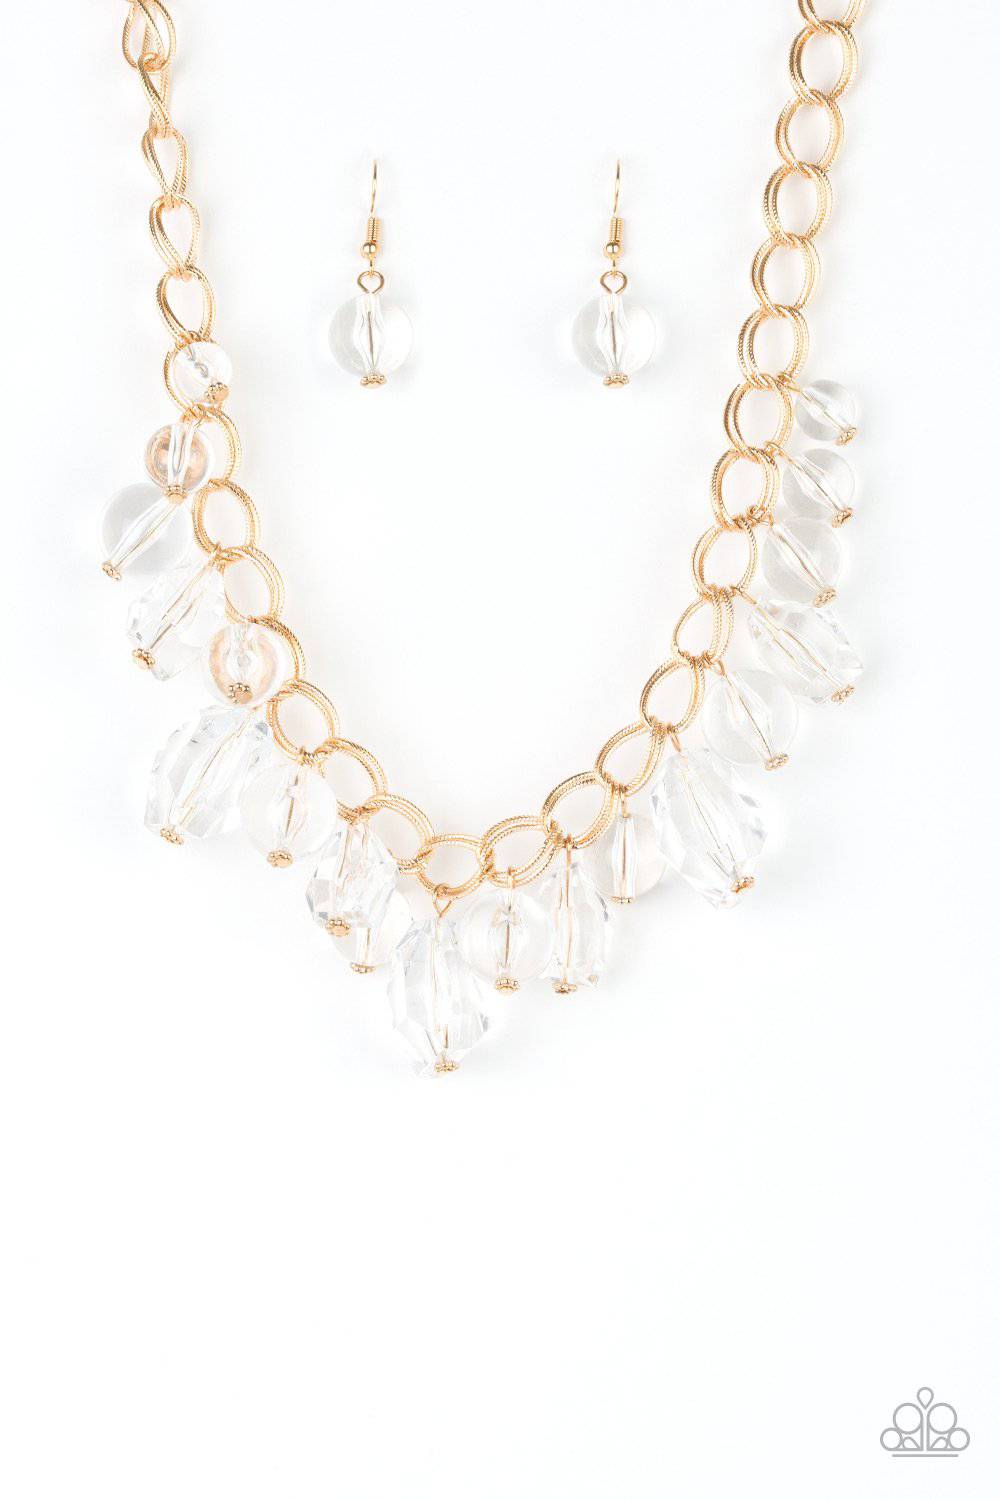 Gorgeously Globetrotter - Gold and Glassy Bead Necklace - Paparazzi Accessories - GlaMarous Titi Jewels